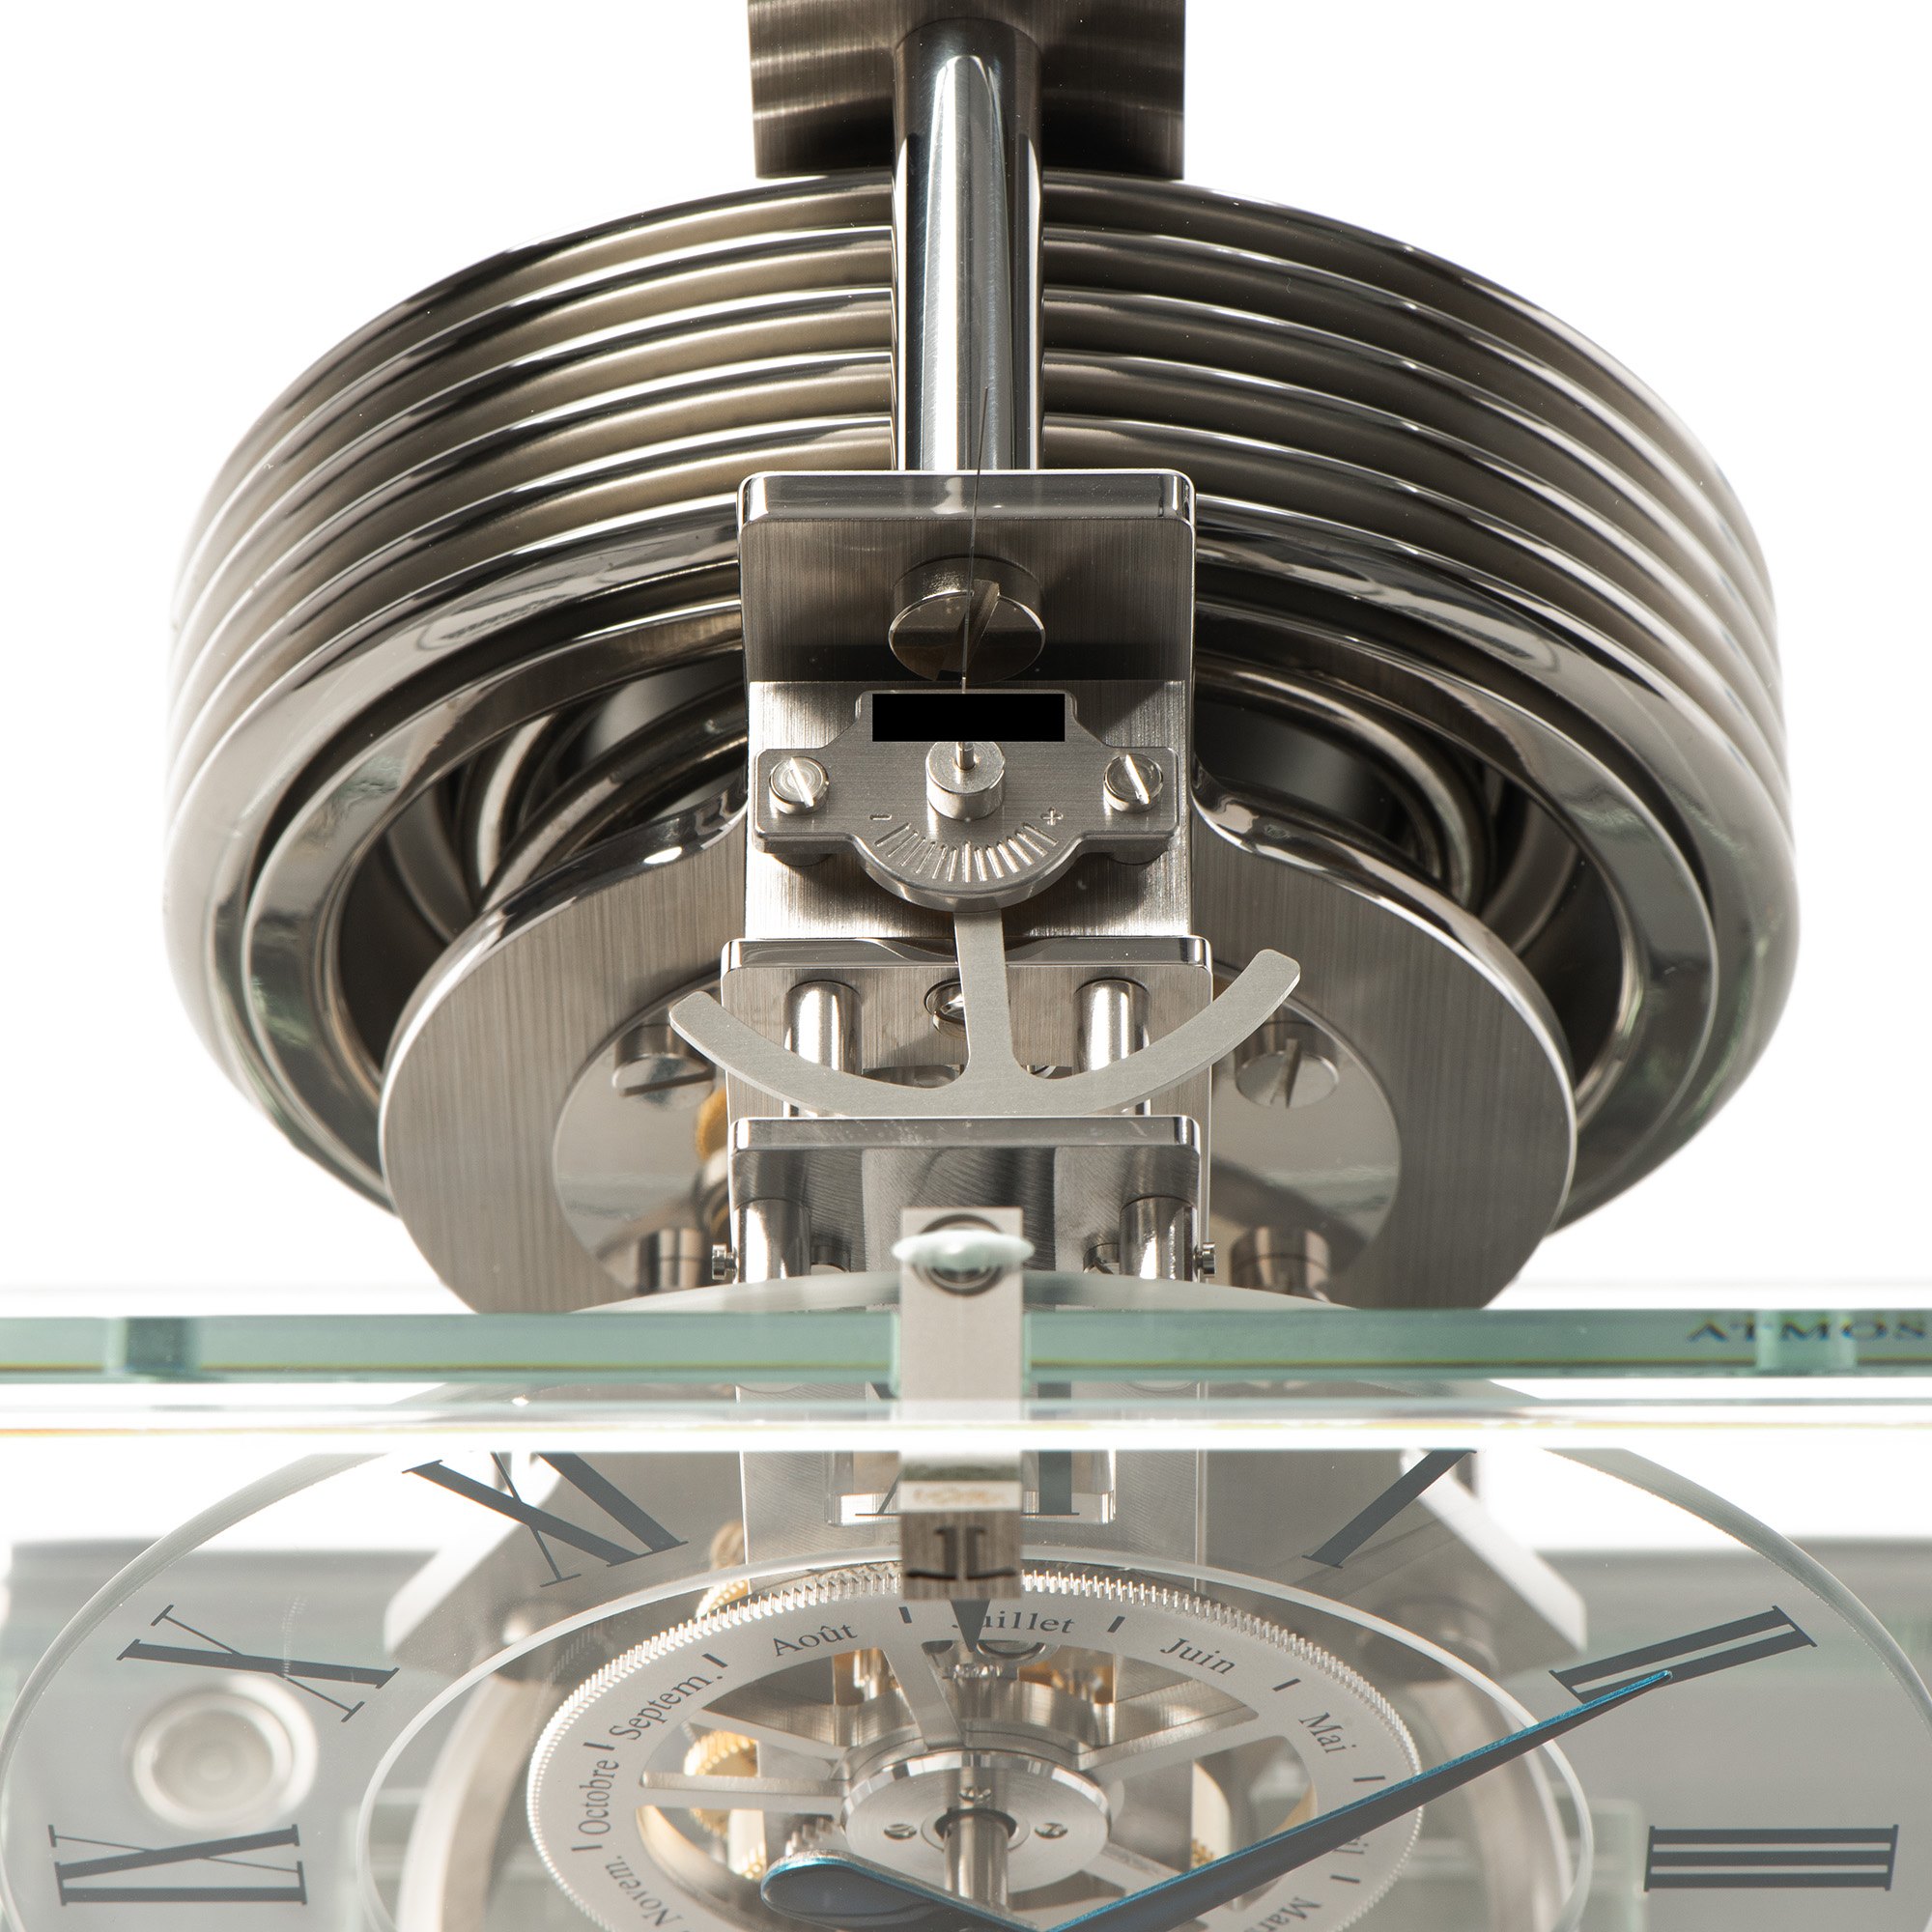 Jaeger-LeCoultre Atmos Clock Stainless Steel 3000